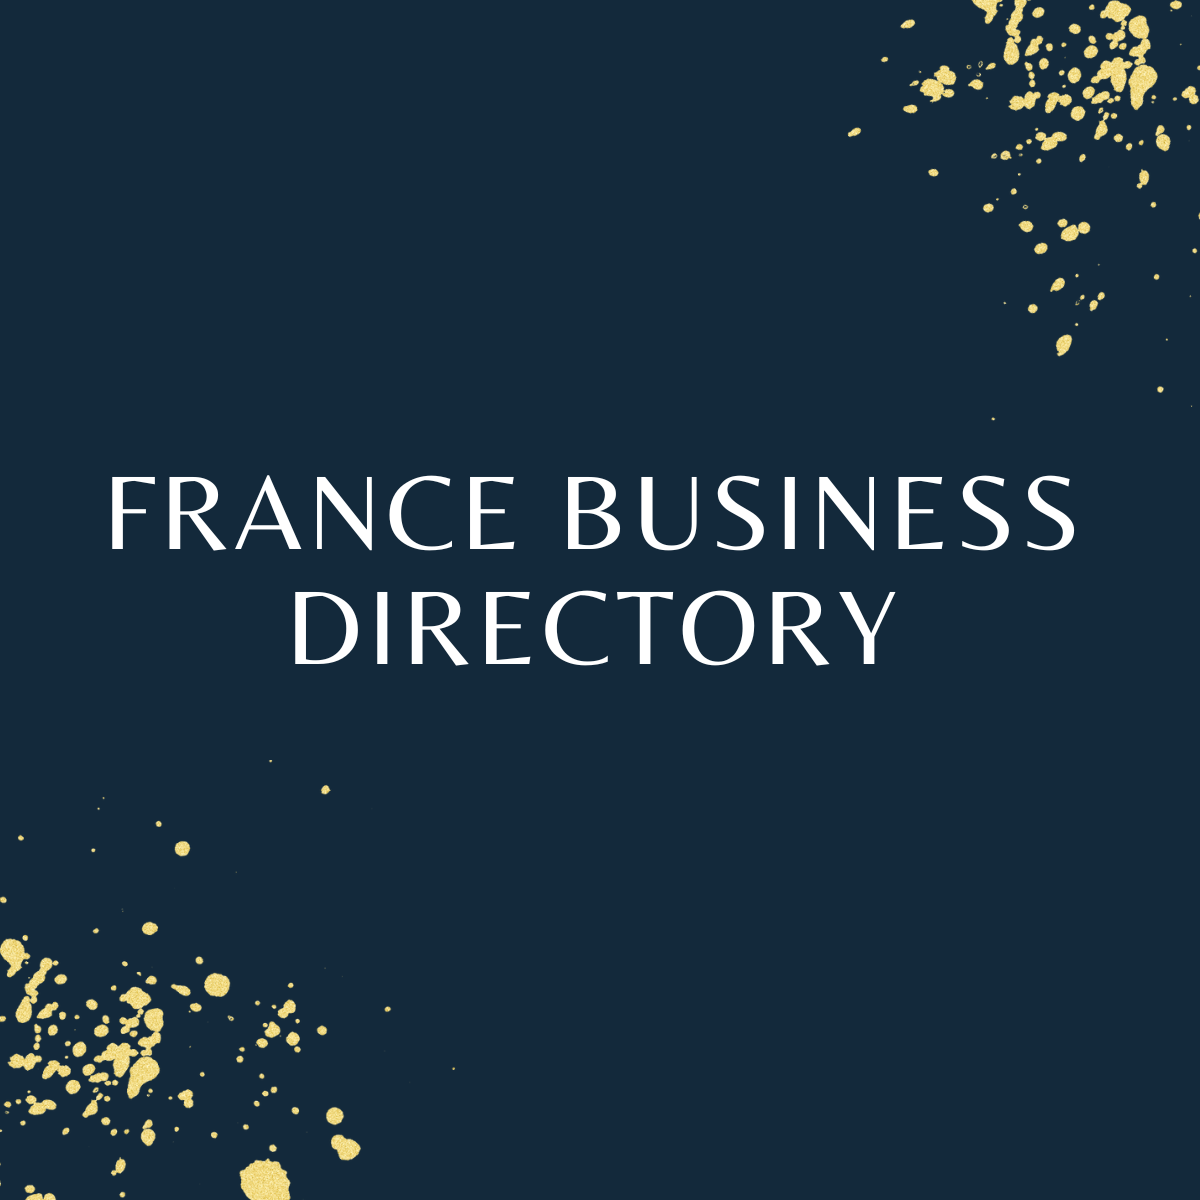 20 Active business directory & listing sites in France